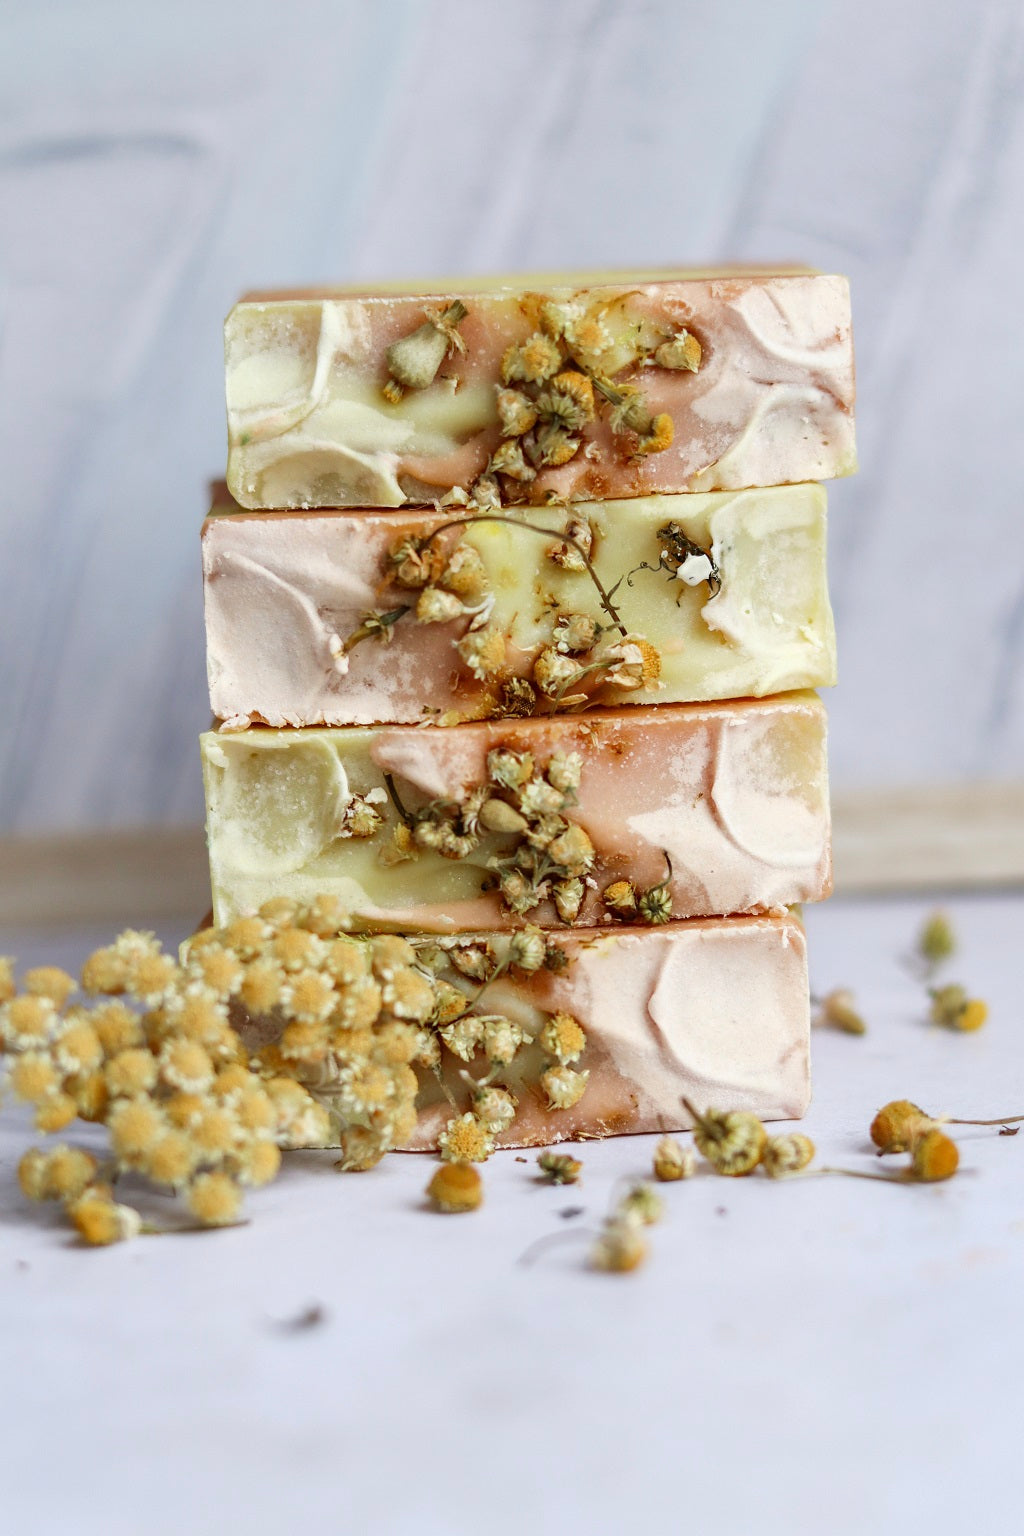 Helichrysum and Chamomile Soap Bar